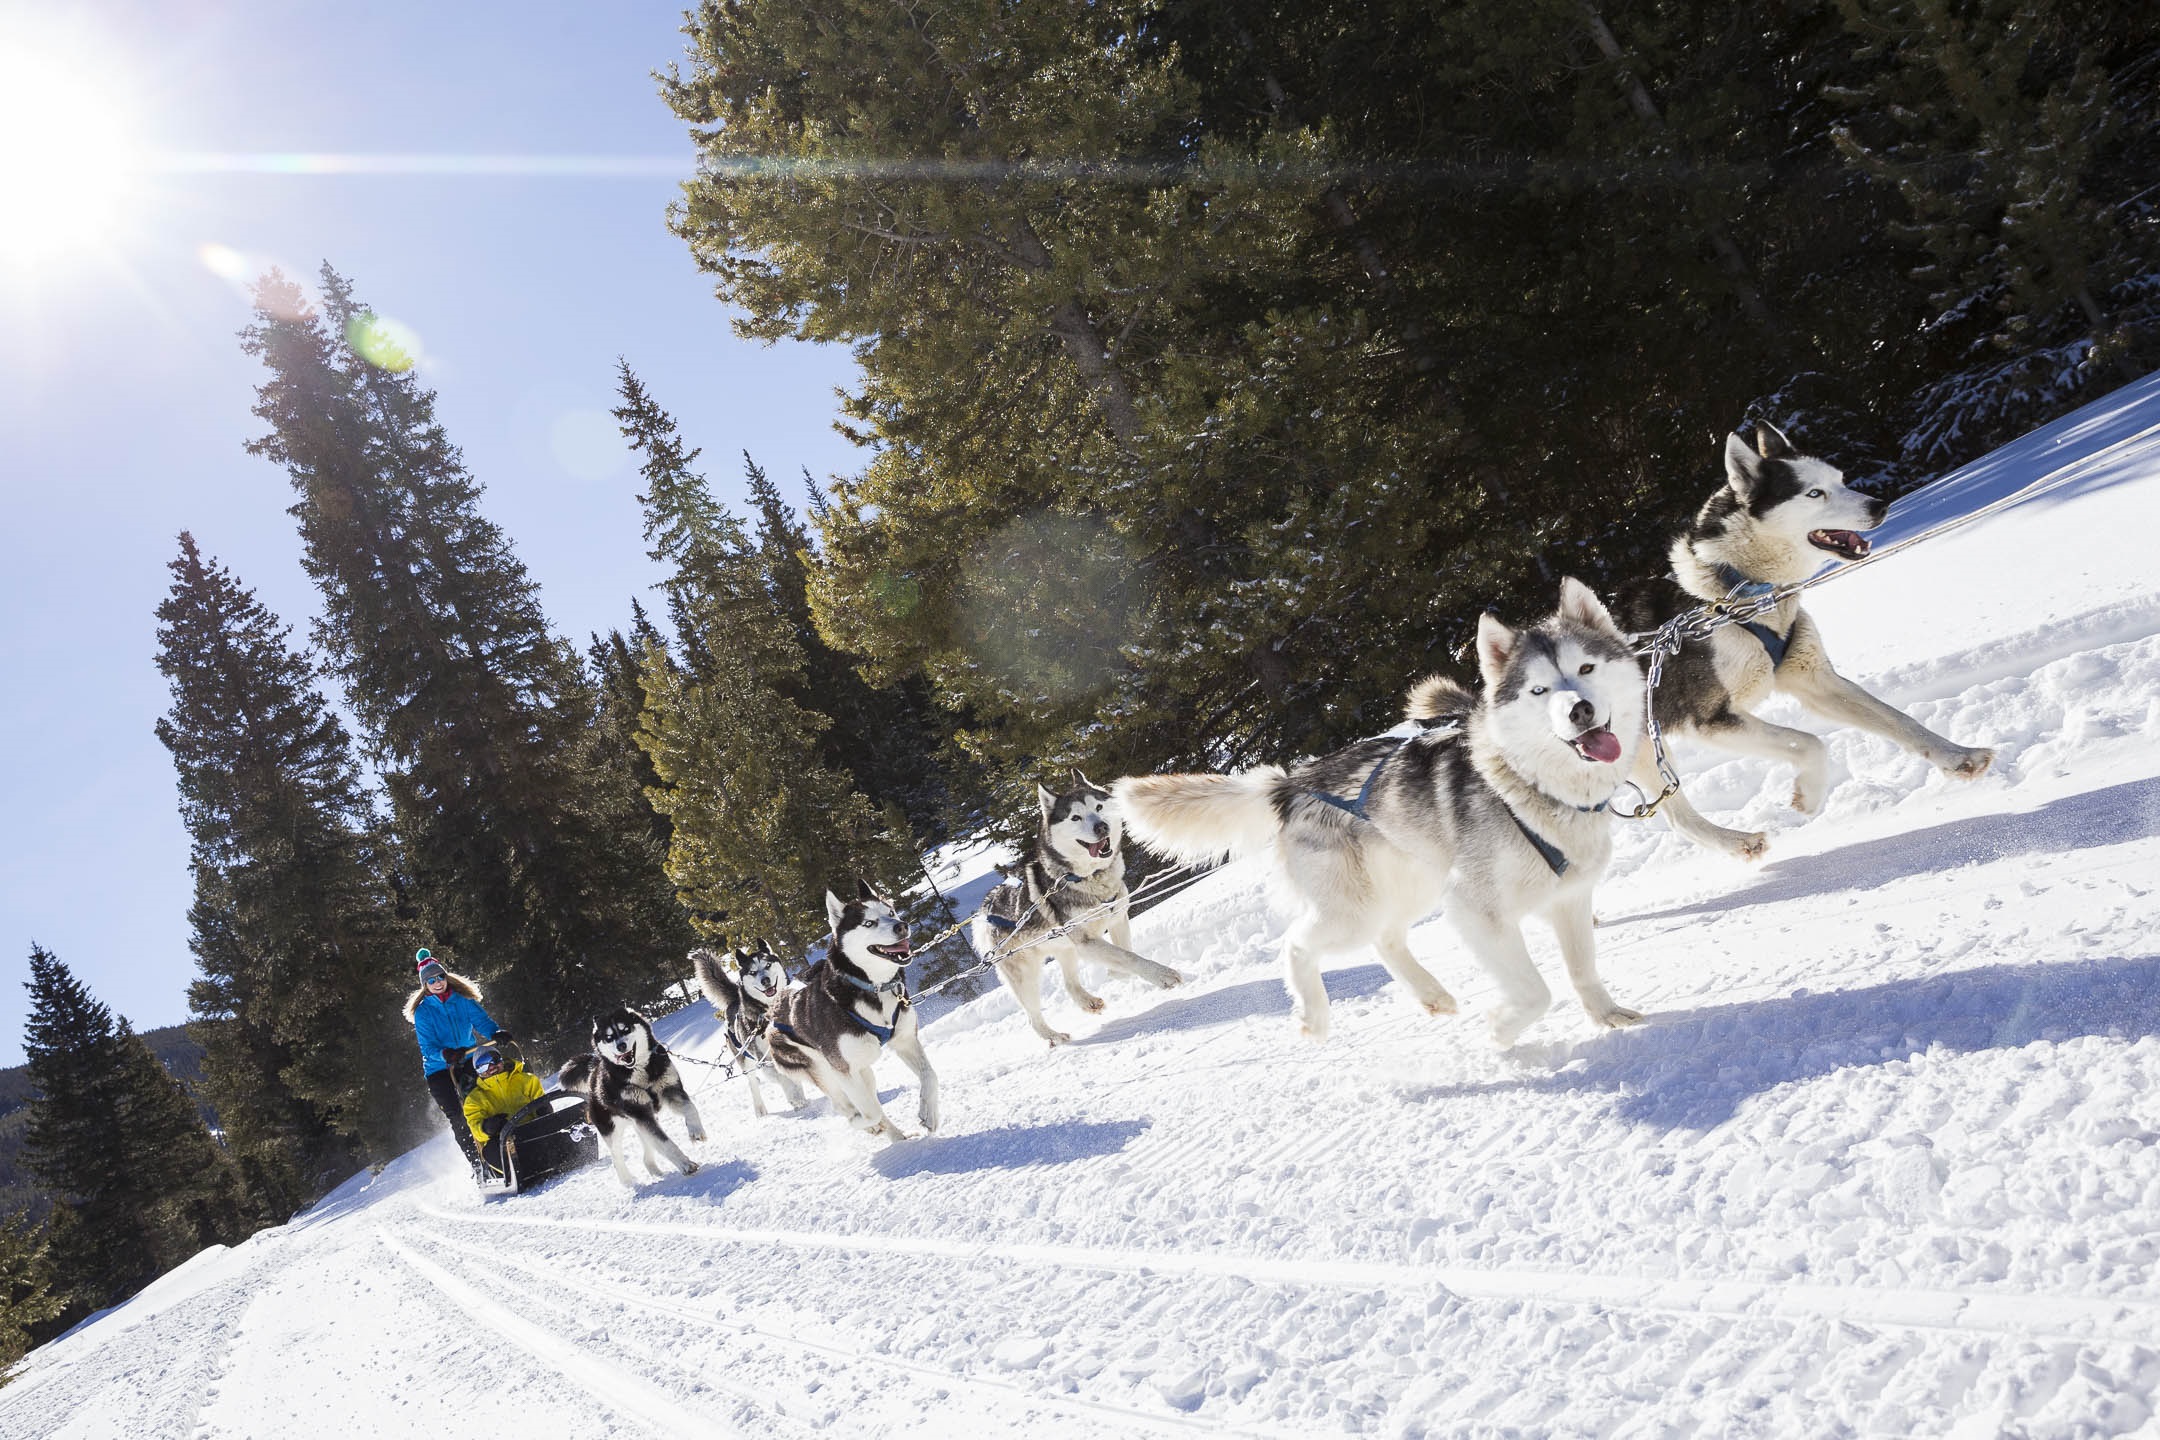 Dogsledding over the snow during a Breckenridge winter